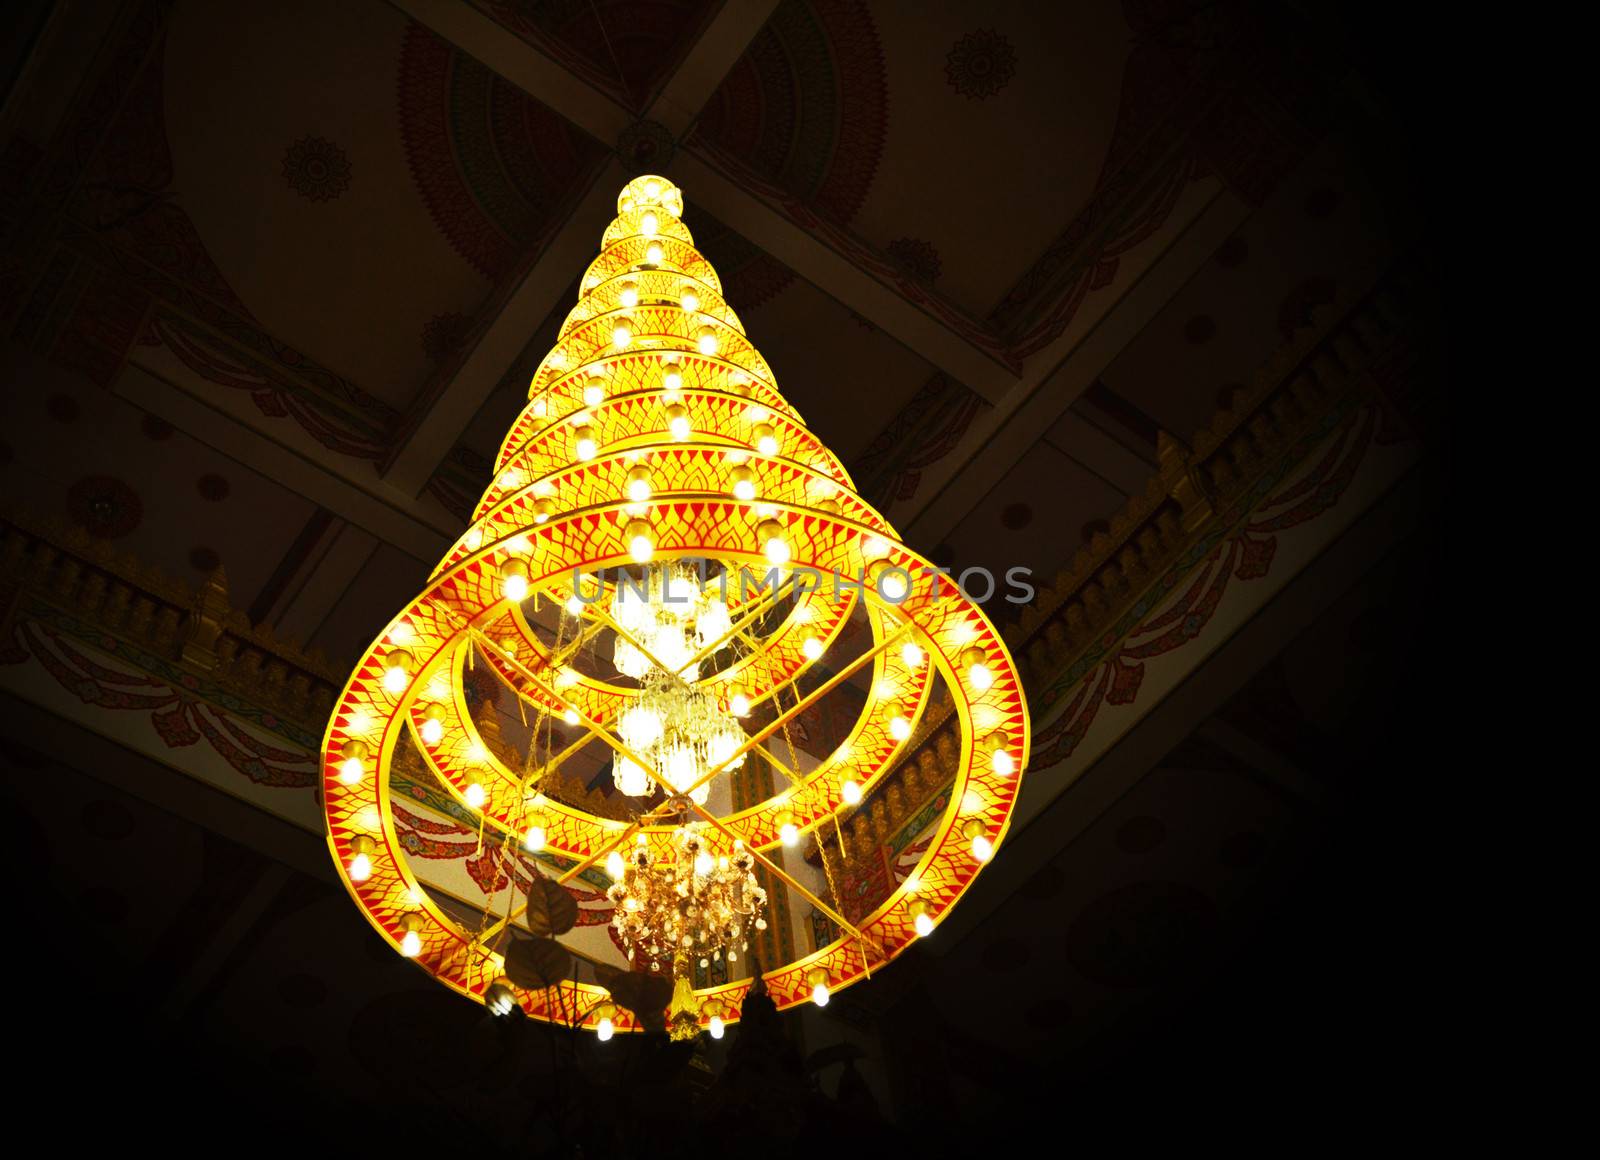 Ceiling light in the temple.